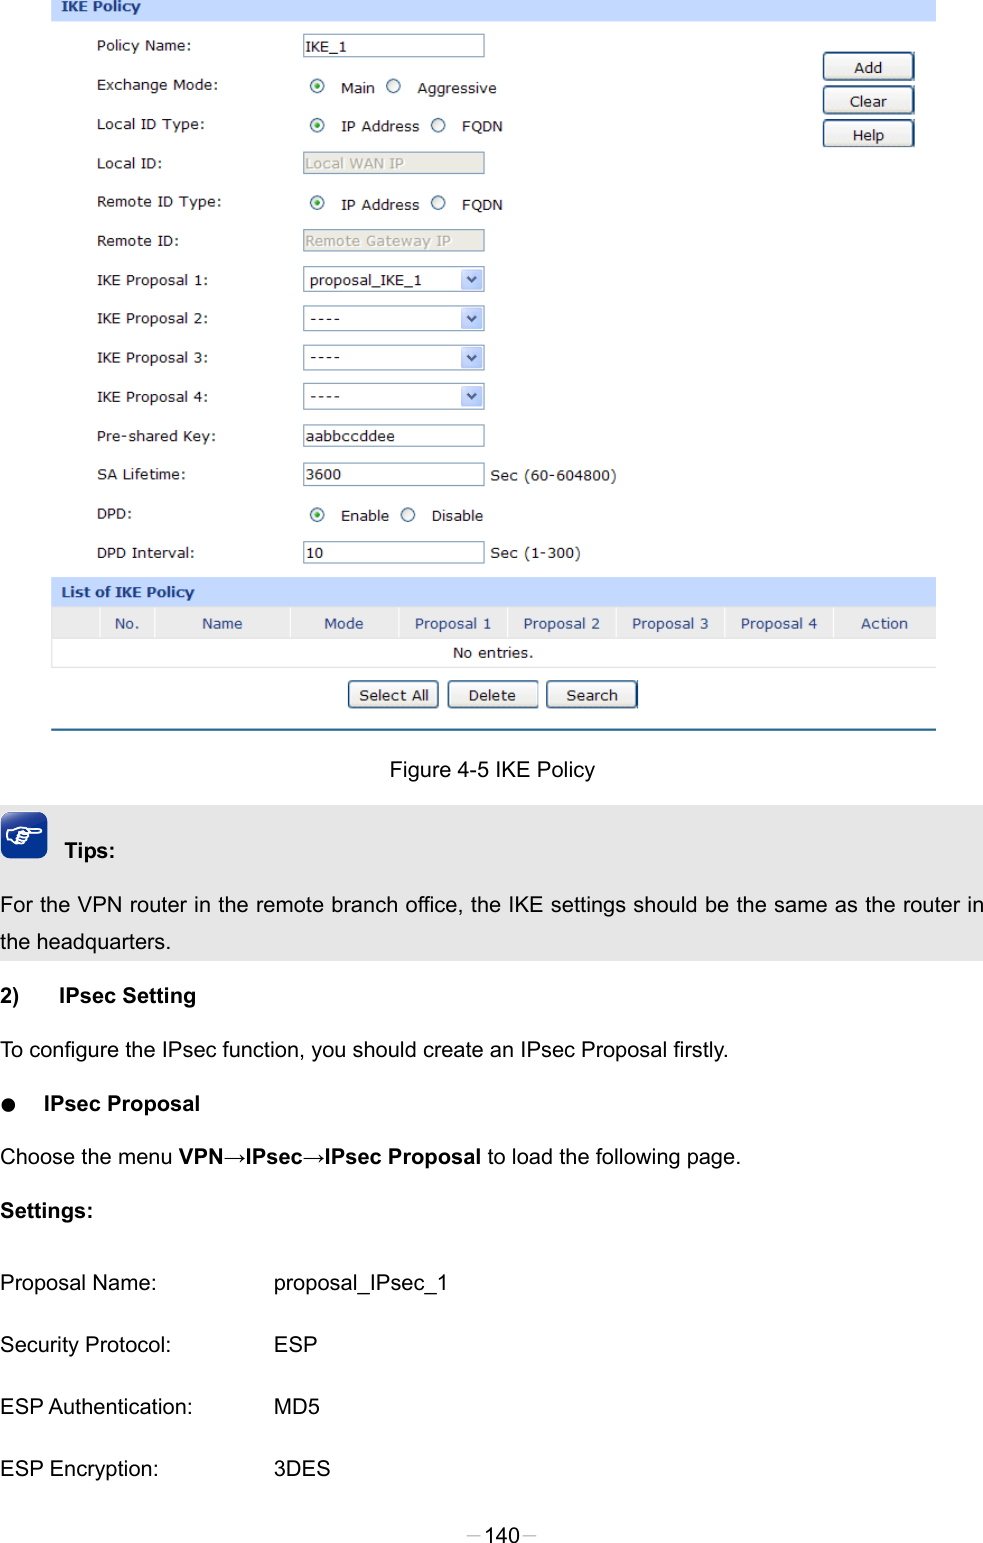   Figure 4-5 IKE Policy Tips: For the VPN router in the remote branch office, the IKE settings should be the same as the router in the headquarters.   2) IPsec Setting To configure the IPsec function, you should create an IPsec Proposal firstly.   ● IPsec Proposal Choose the menu VPN→IPsec→IPsec Proposal to load the following page. Settings: Proposal Name: proposal_IPsec_1 Security Protocol: ESP ESP Authentication: MD5 ESP Encryption: 3DES -140- 